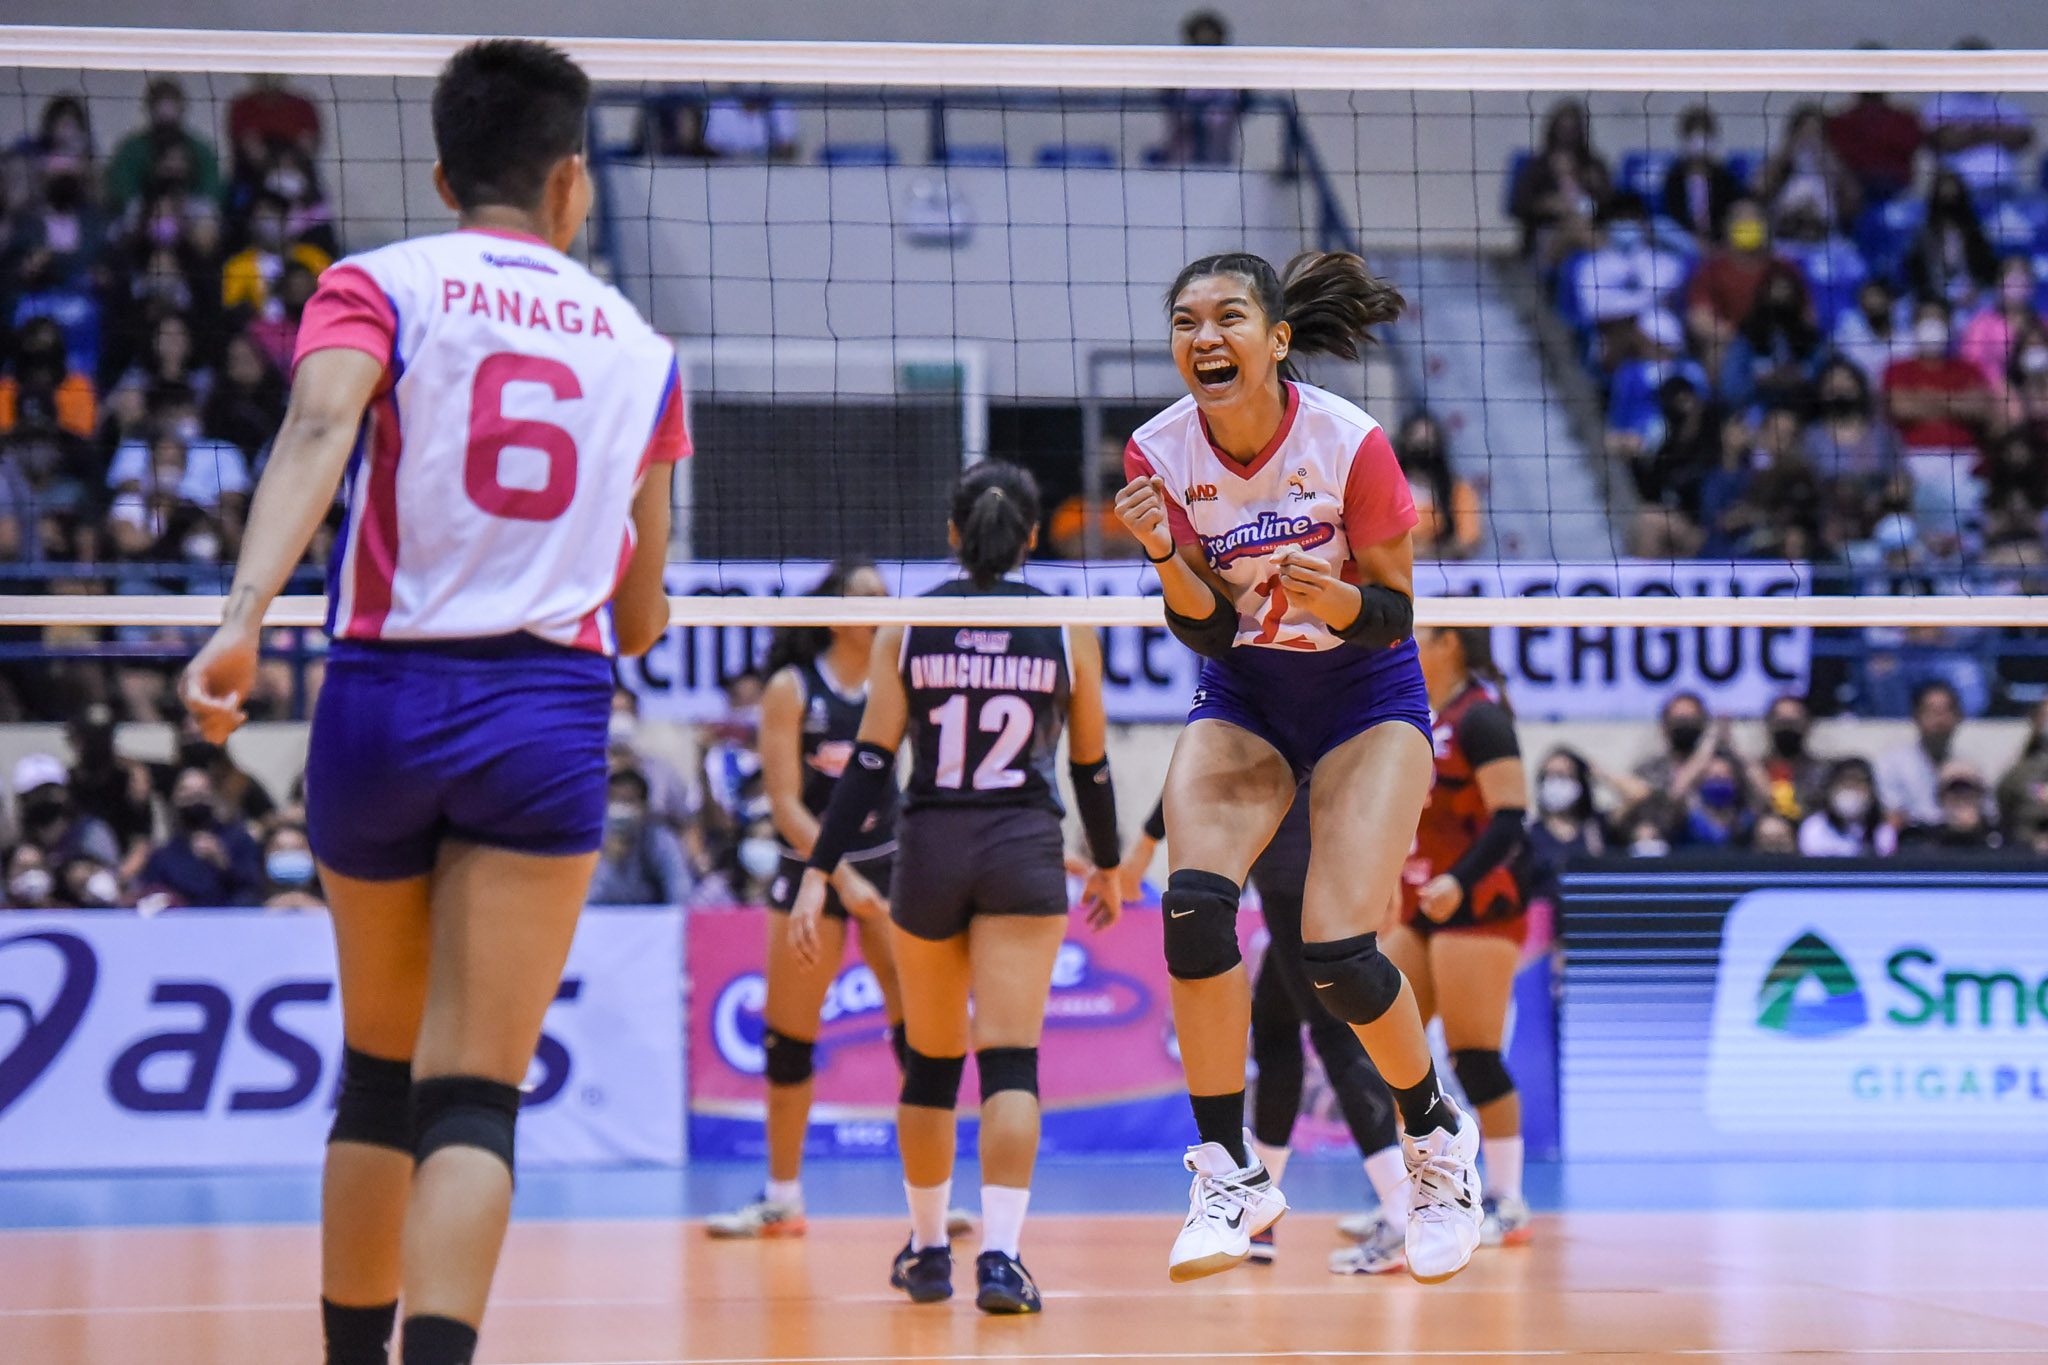 Creamline stuns PLDT from 2 sets down; Cignal survives Army in 5